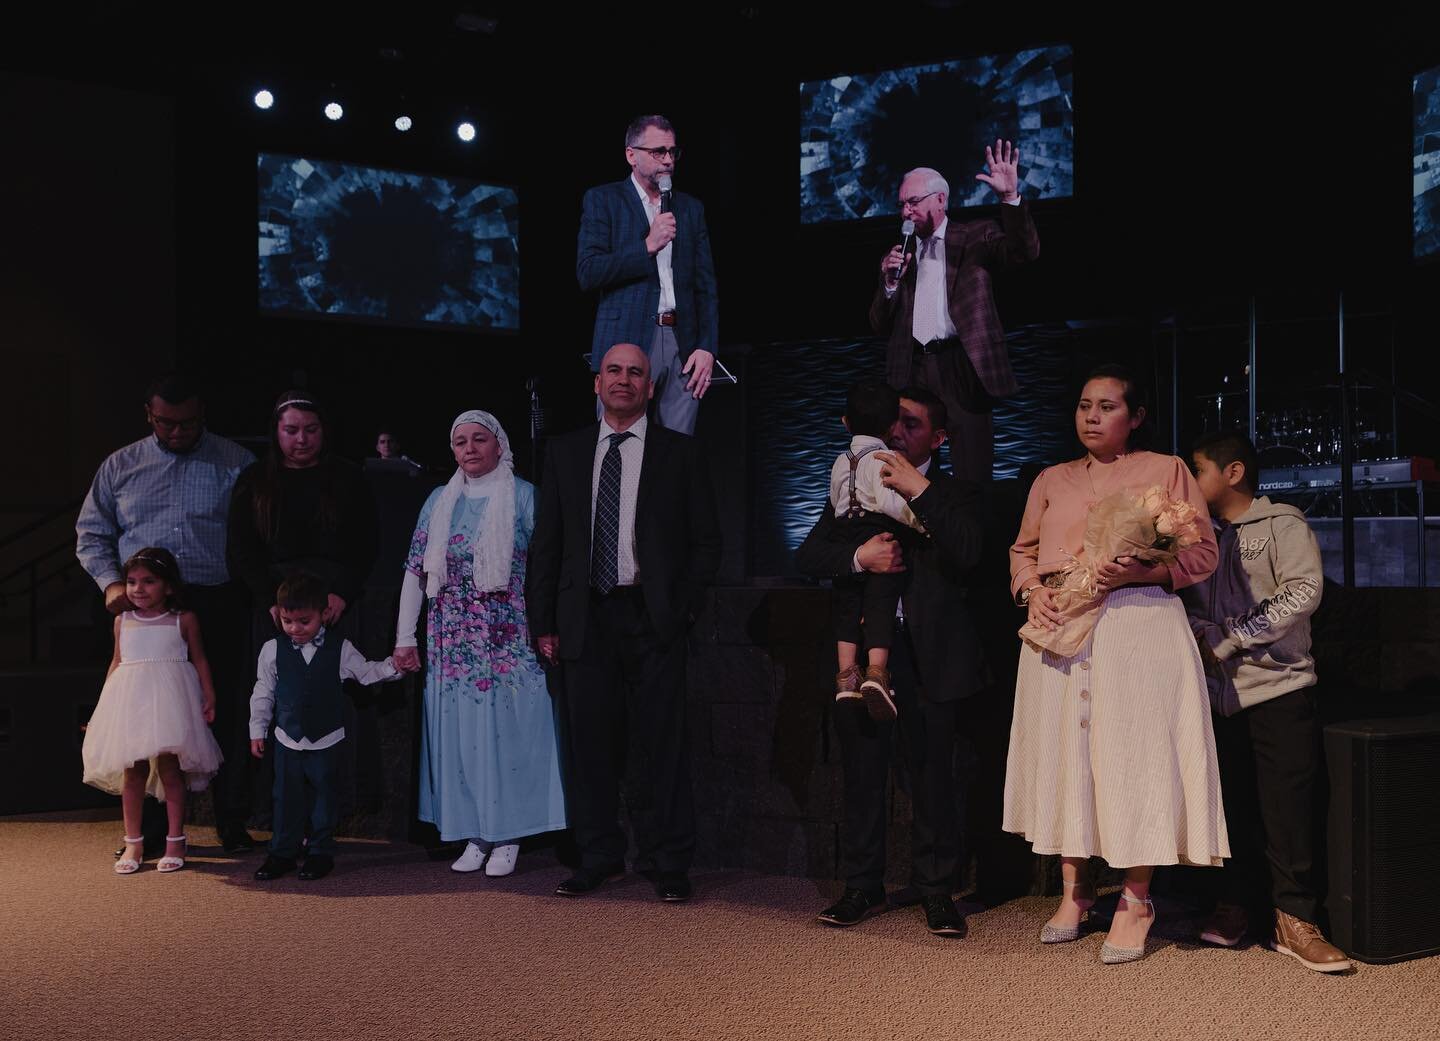 We celebrated three couples in ministry transition today!

Jose and Anelia Catalan pastoring Iglesia Betel for 4 years are starting a new work in their home. 

Daniel and Brissa Lopez are assuming the pastoral role of Iglesia Betel.

Luciano and Jess